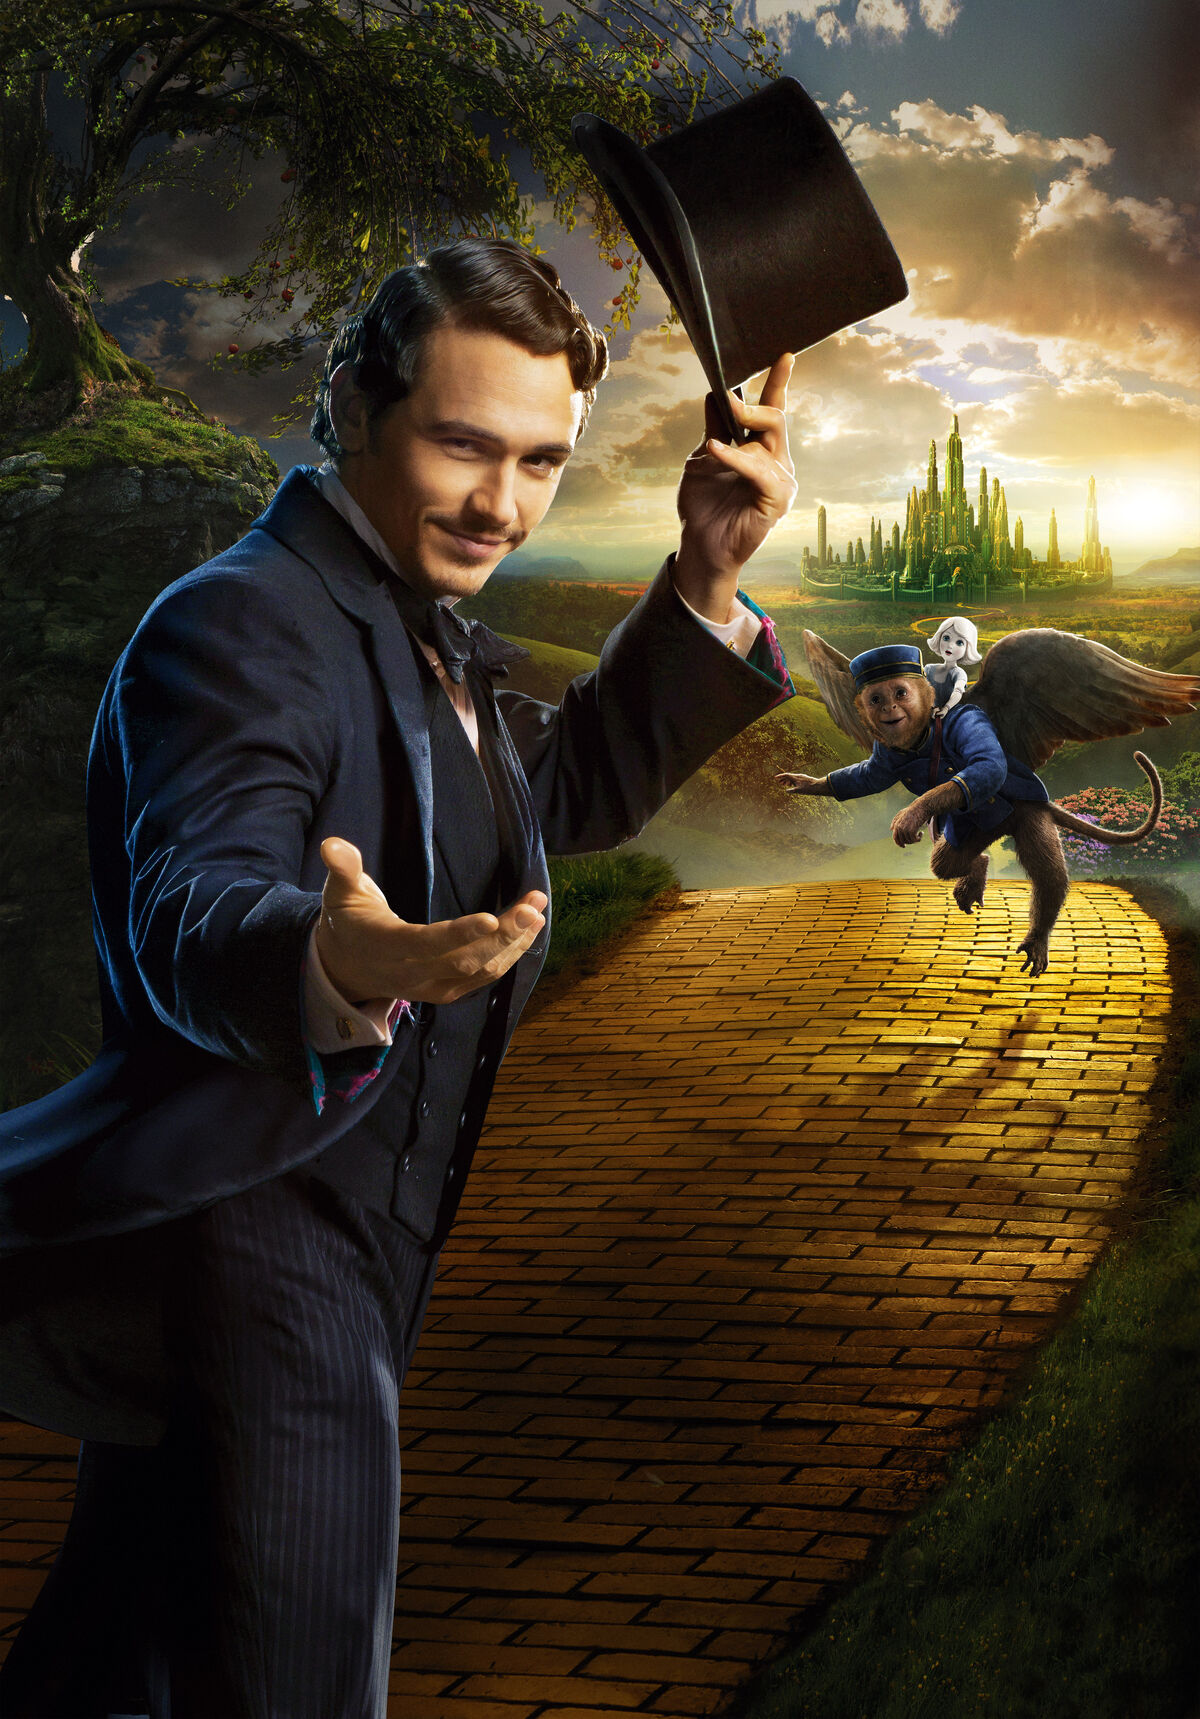 Oz The Great and Powerful - With the new Temple Run Oz update you